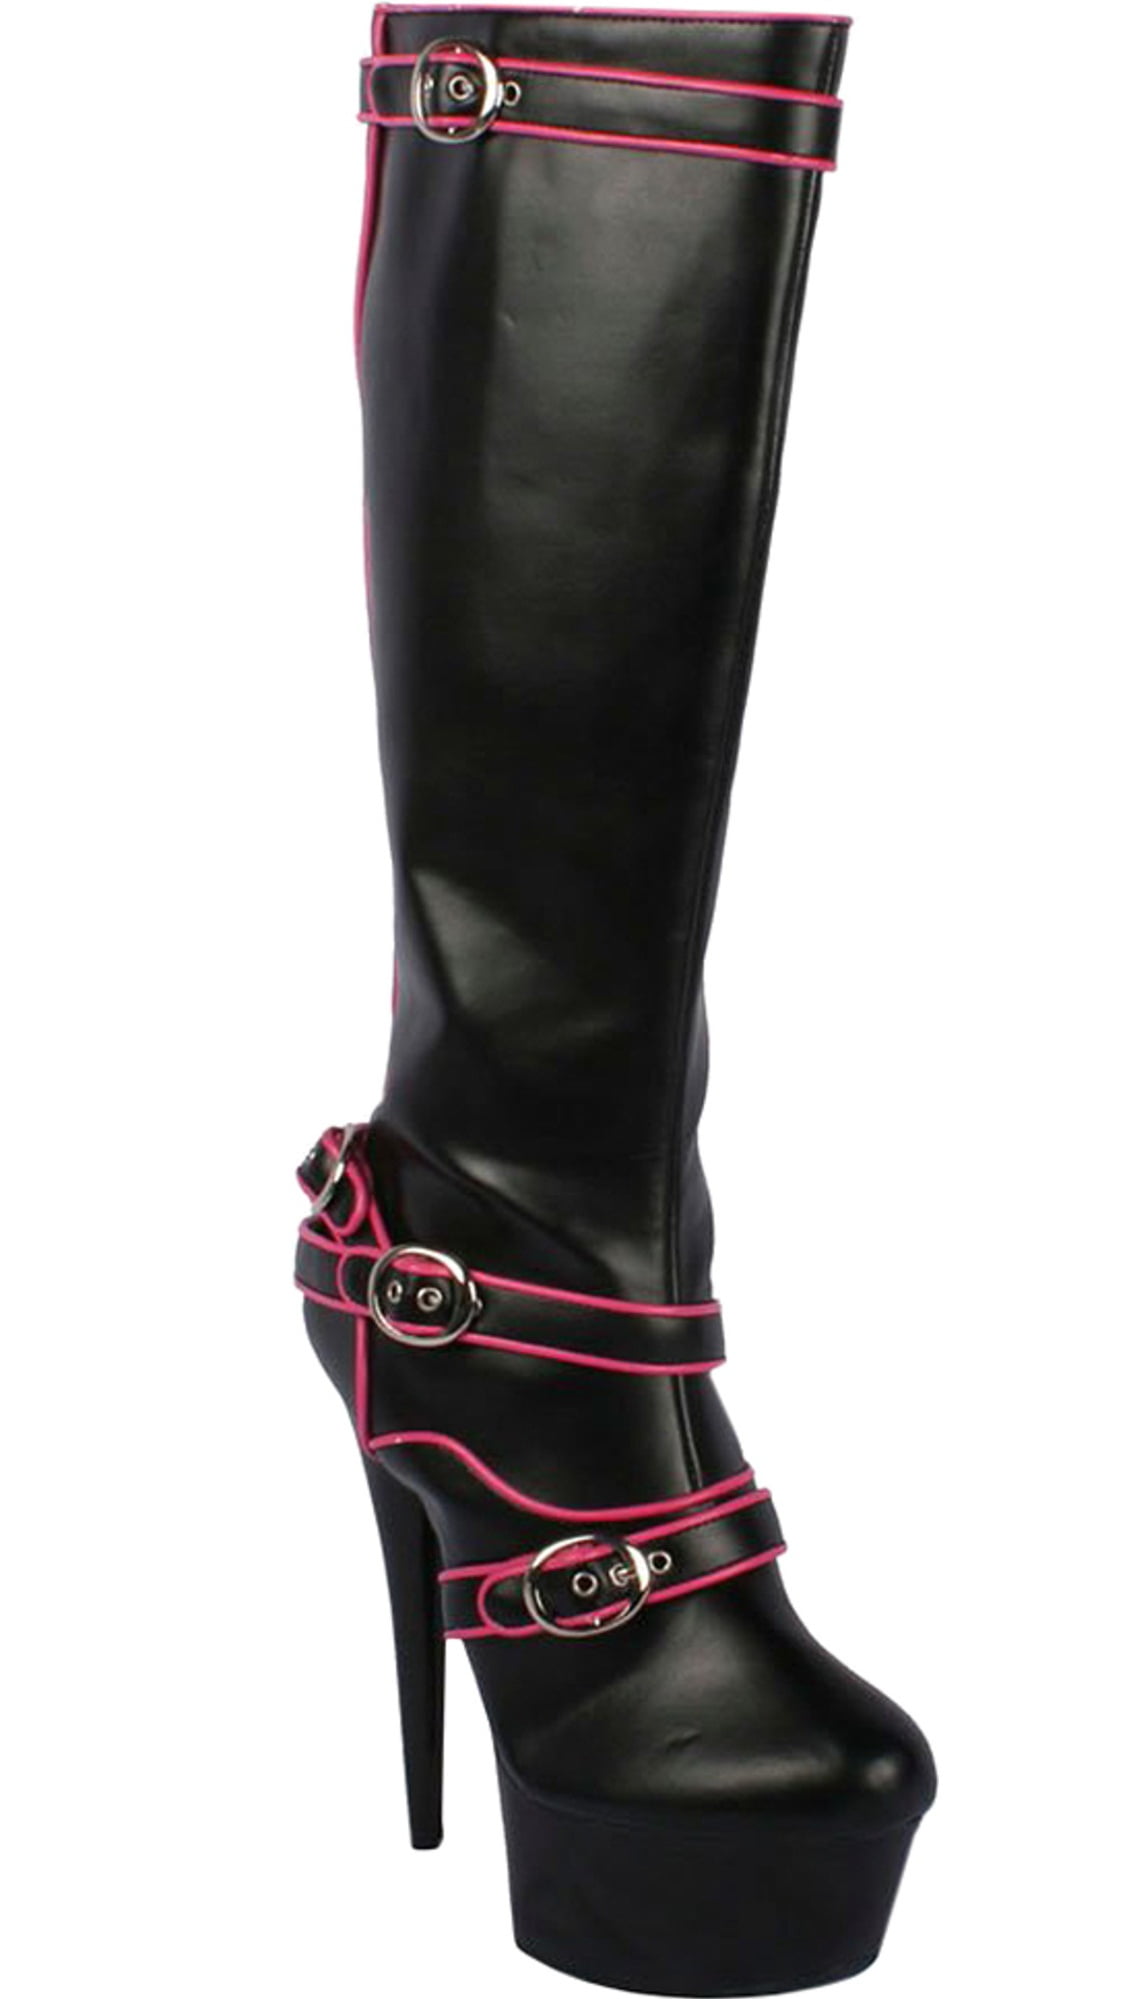 Ellie - 6 Inch Black Knee Boots Pink Piping Criss Crross Strap Womens ...